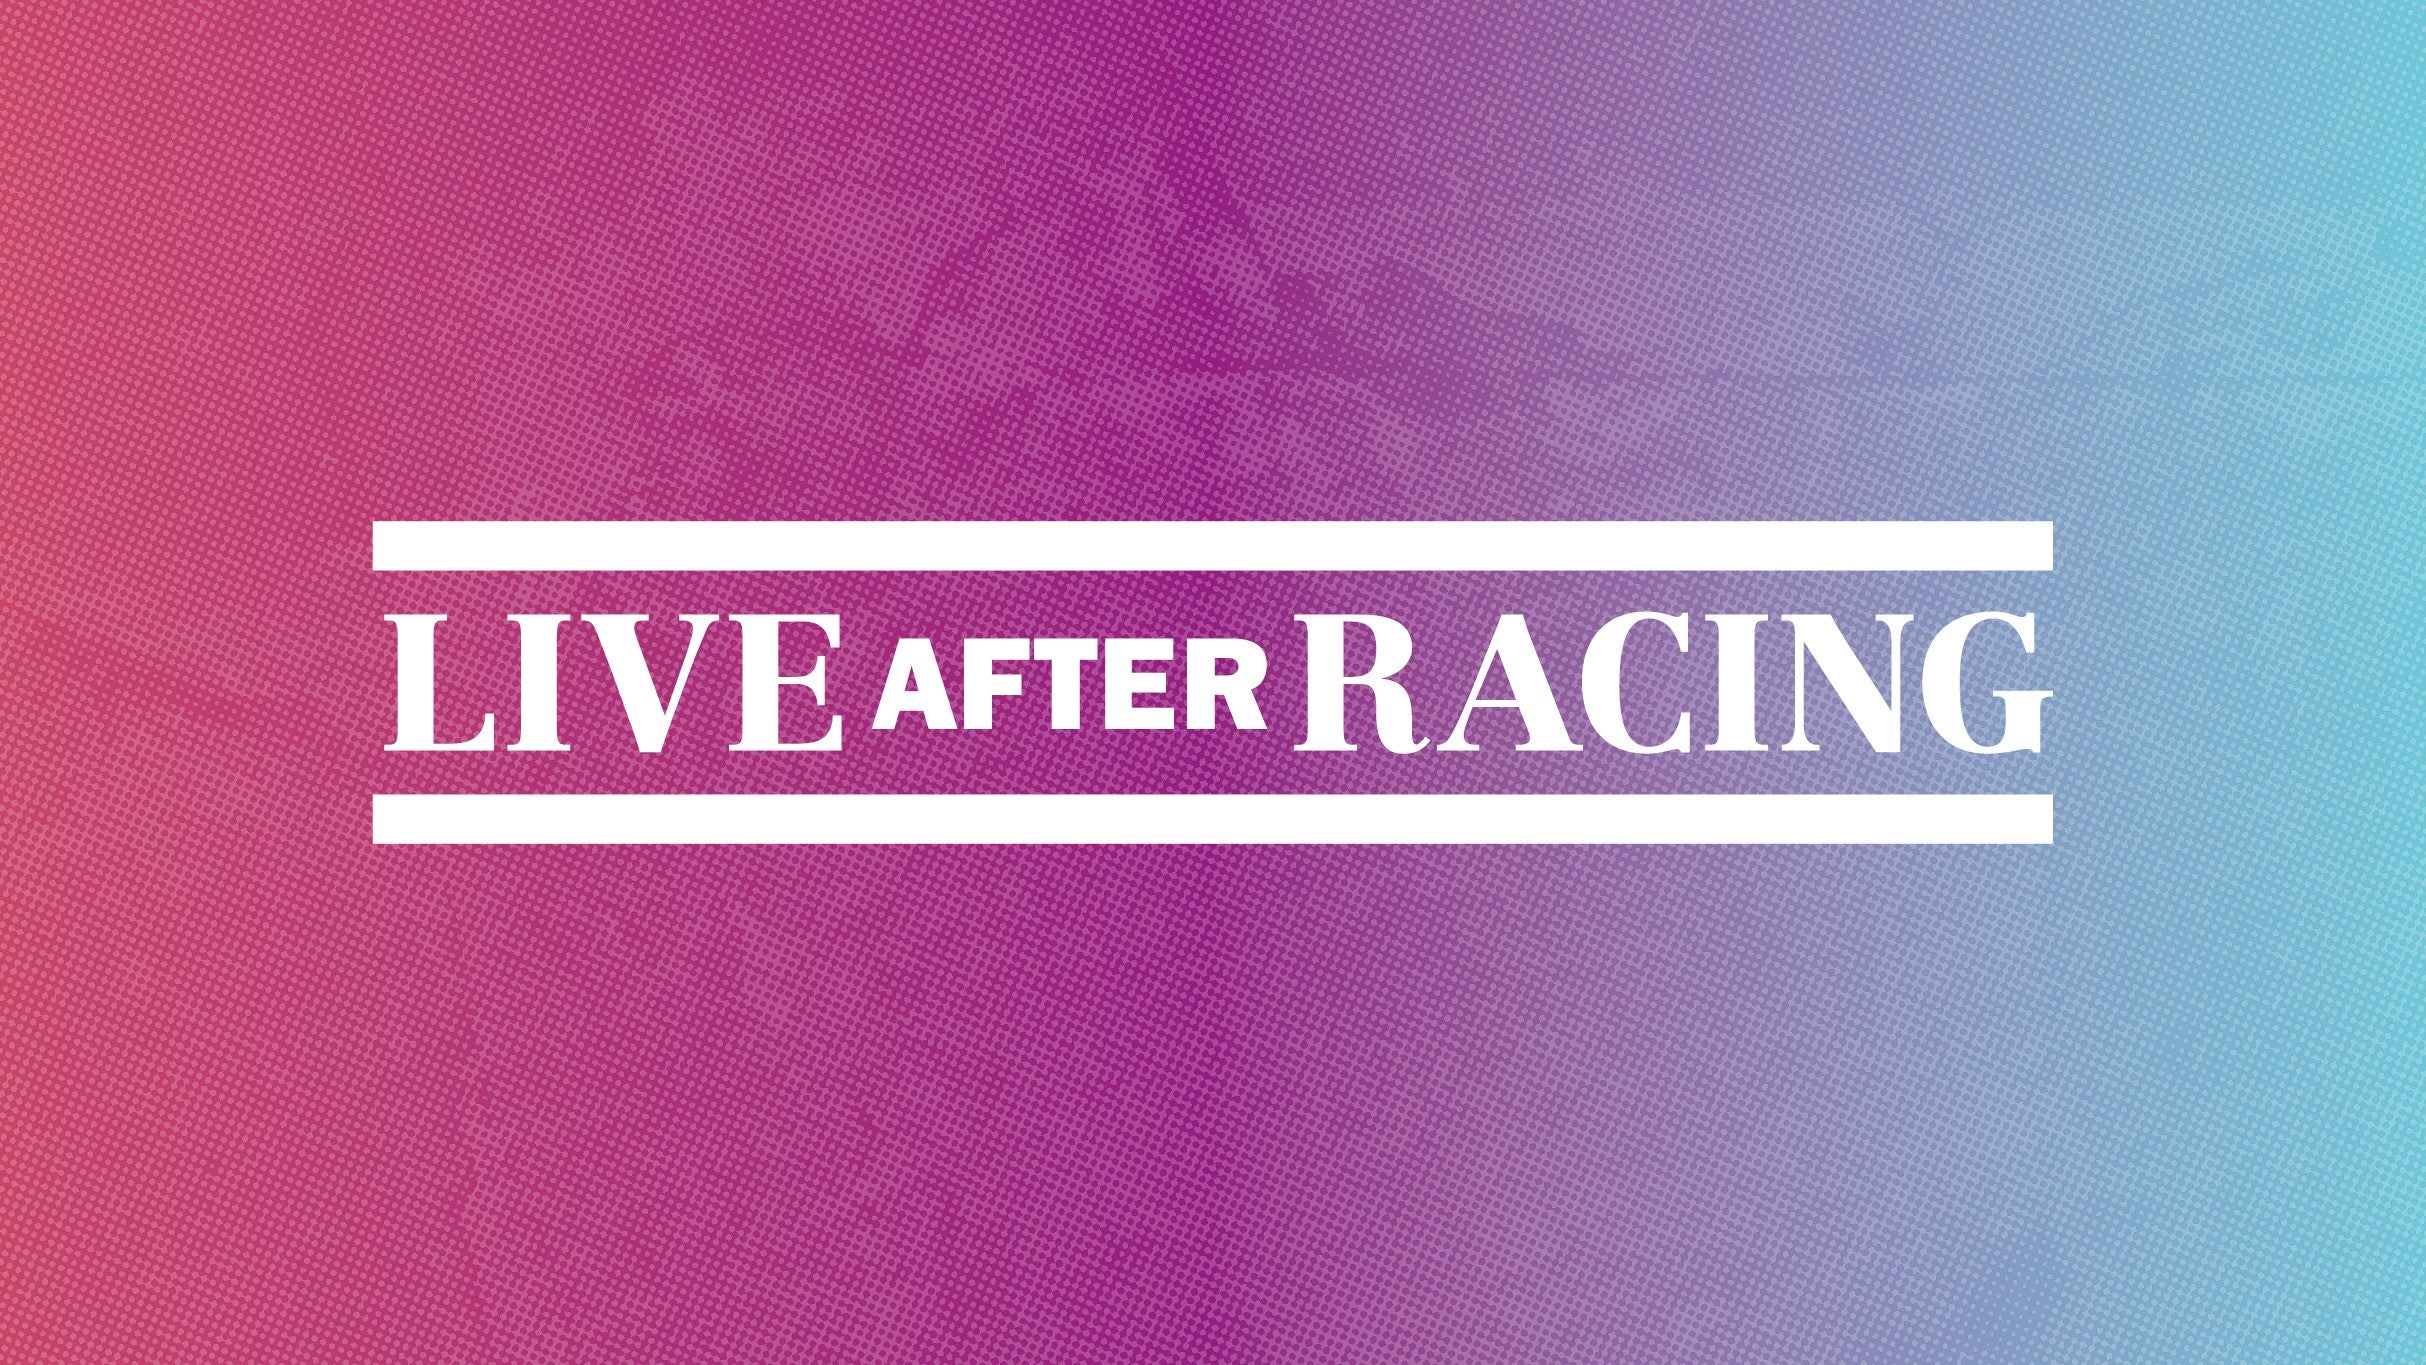 Dizzee Rascal - Live After Racing Event Title Pic